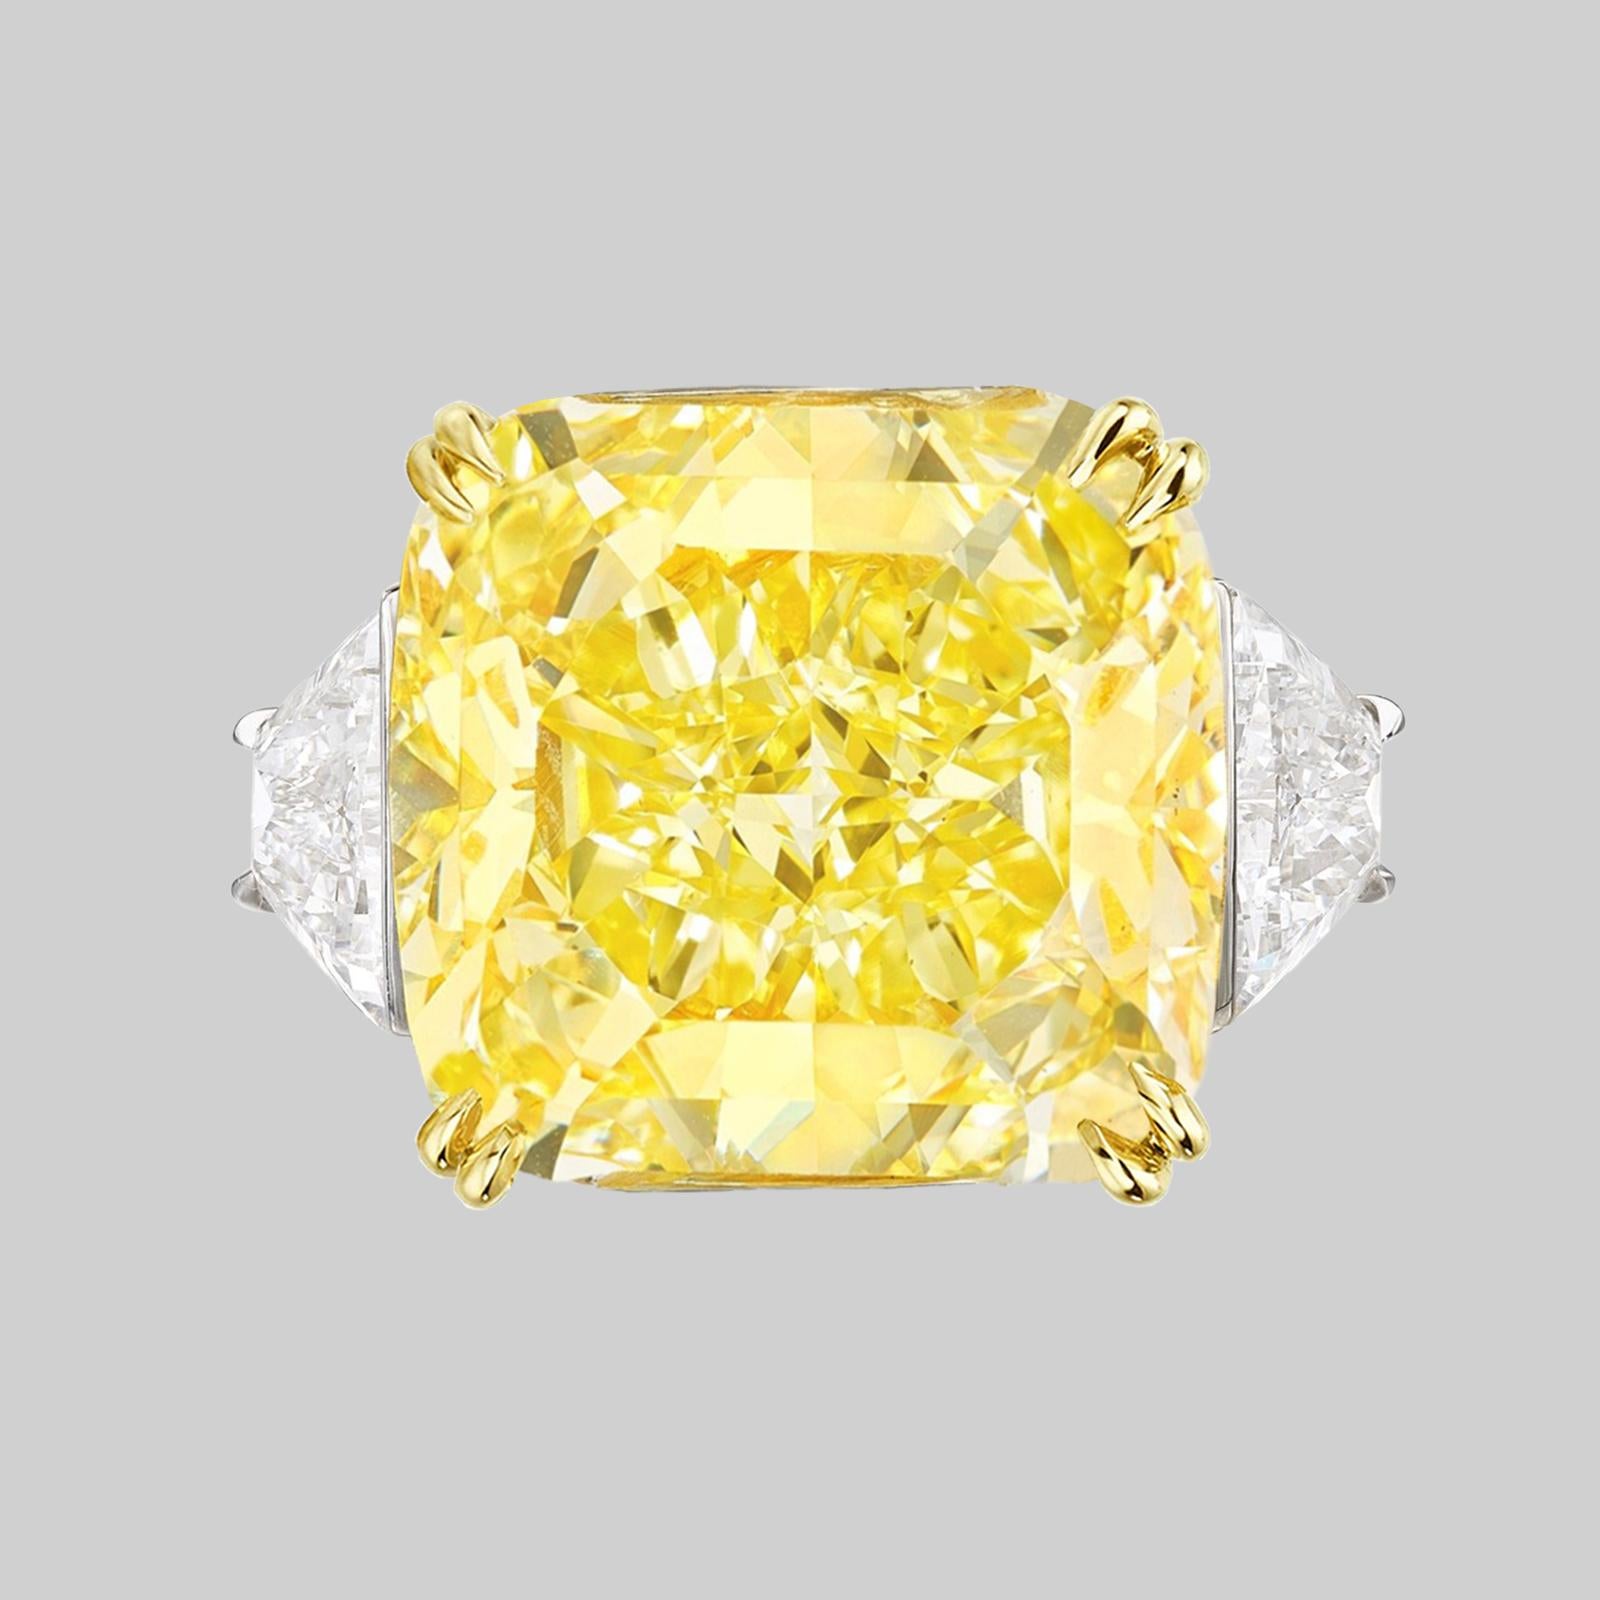 EXCEPTIONAL GIA Certified 23 Carat Fancy VIVID Yellow Diamond Ring In New Condition For Sale In Rome, IT